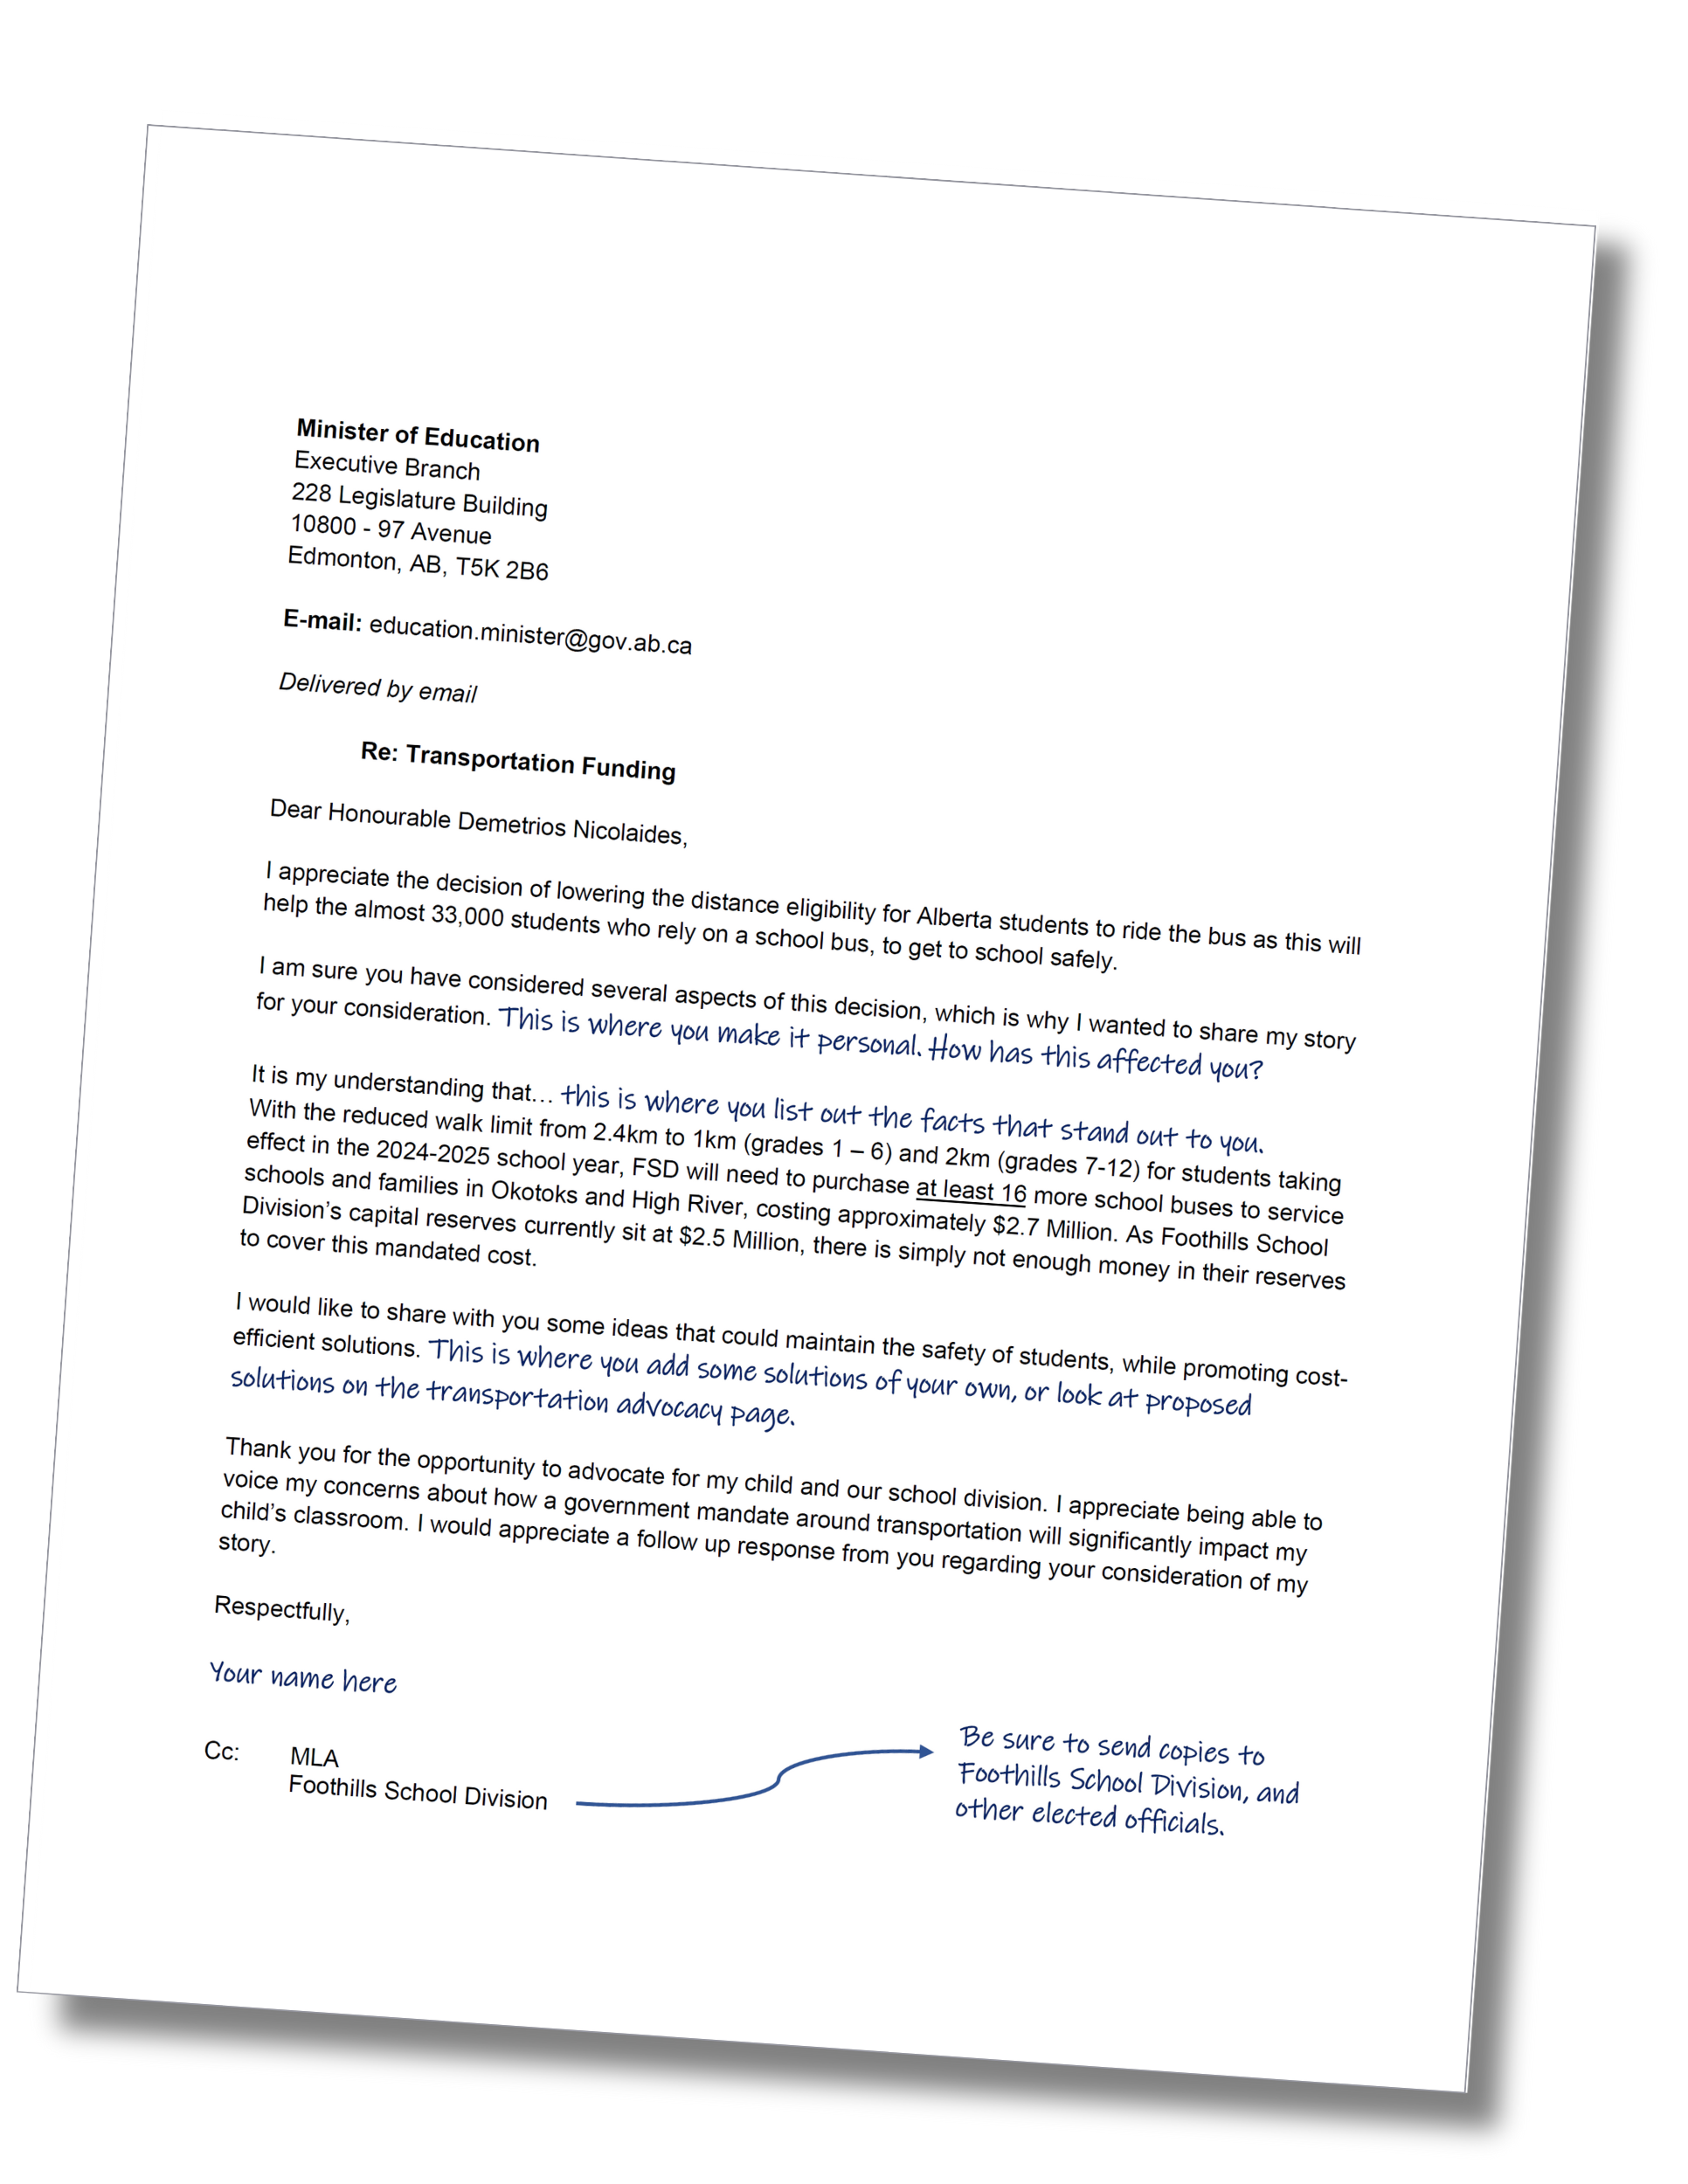 An image of a sample letter of advocacy addressed to the Minister of Education